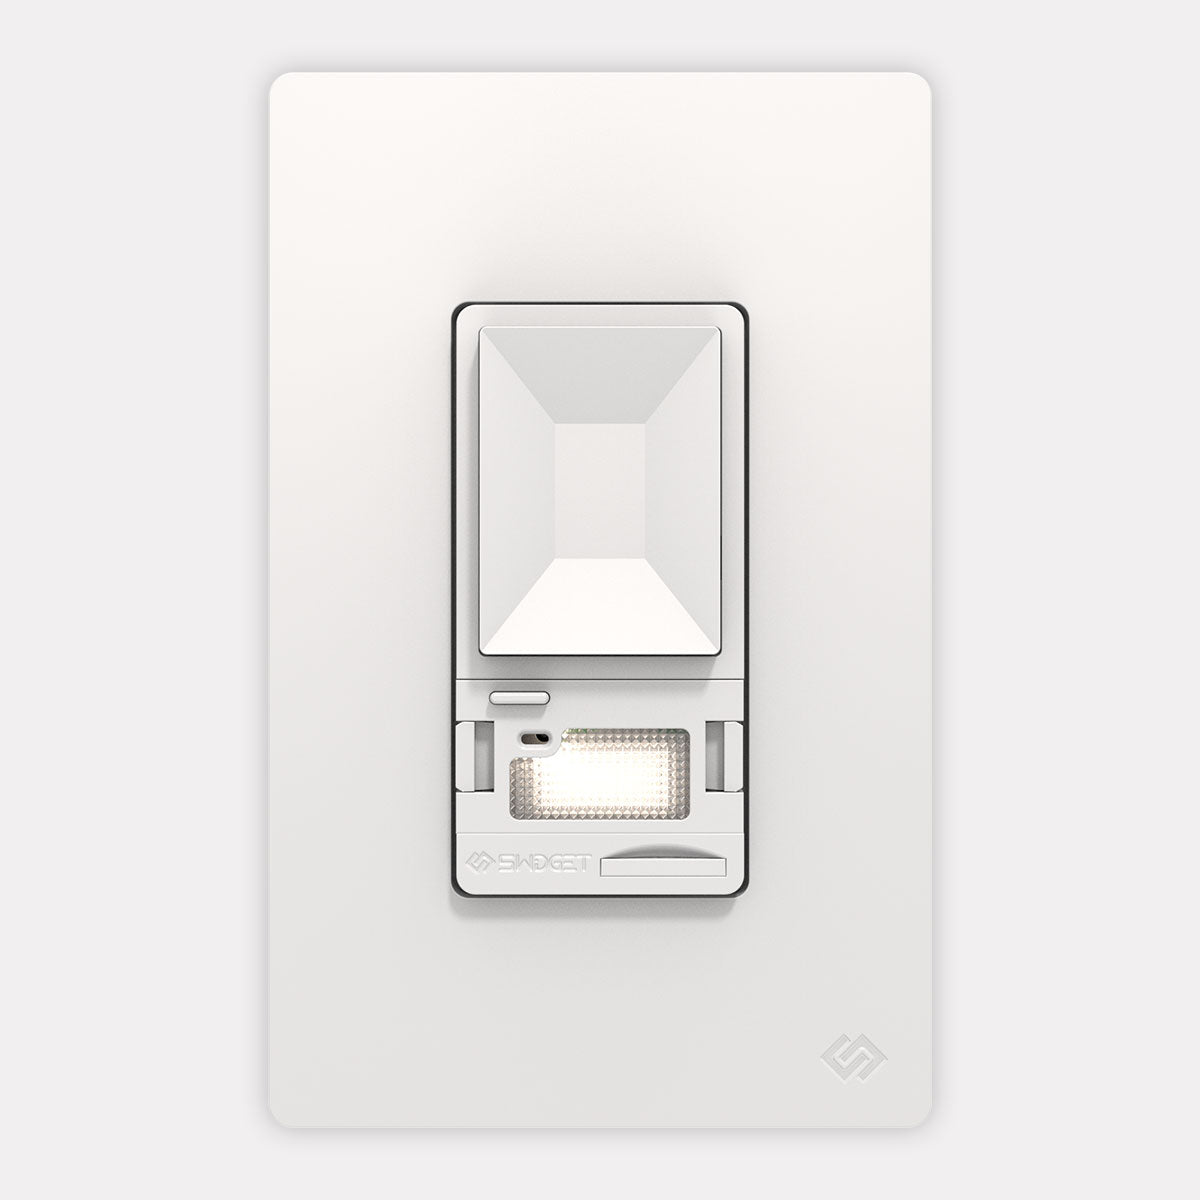 Build your own Dimmer Switch